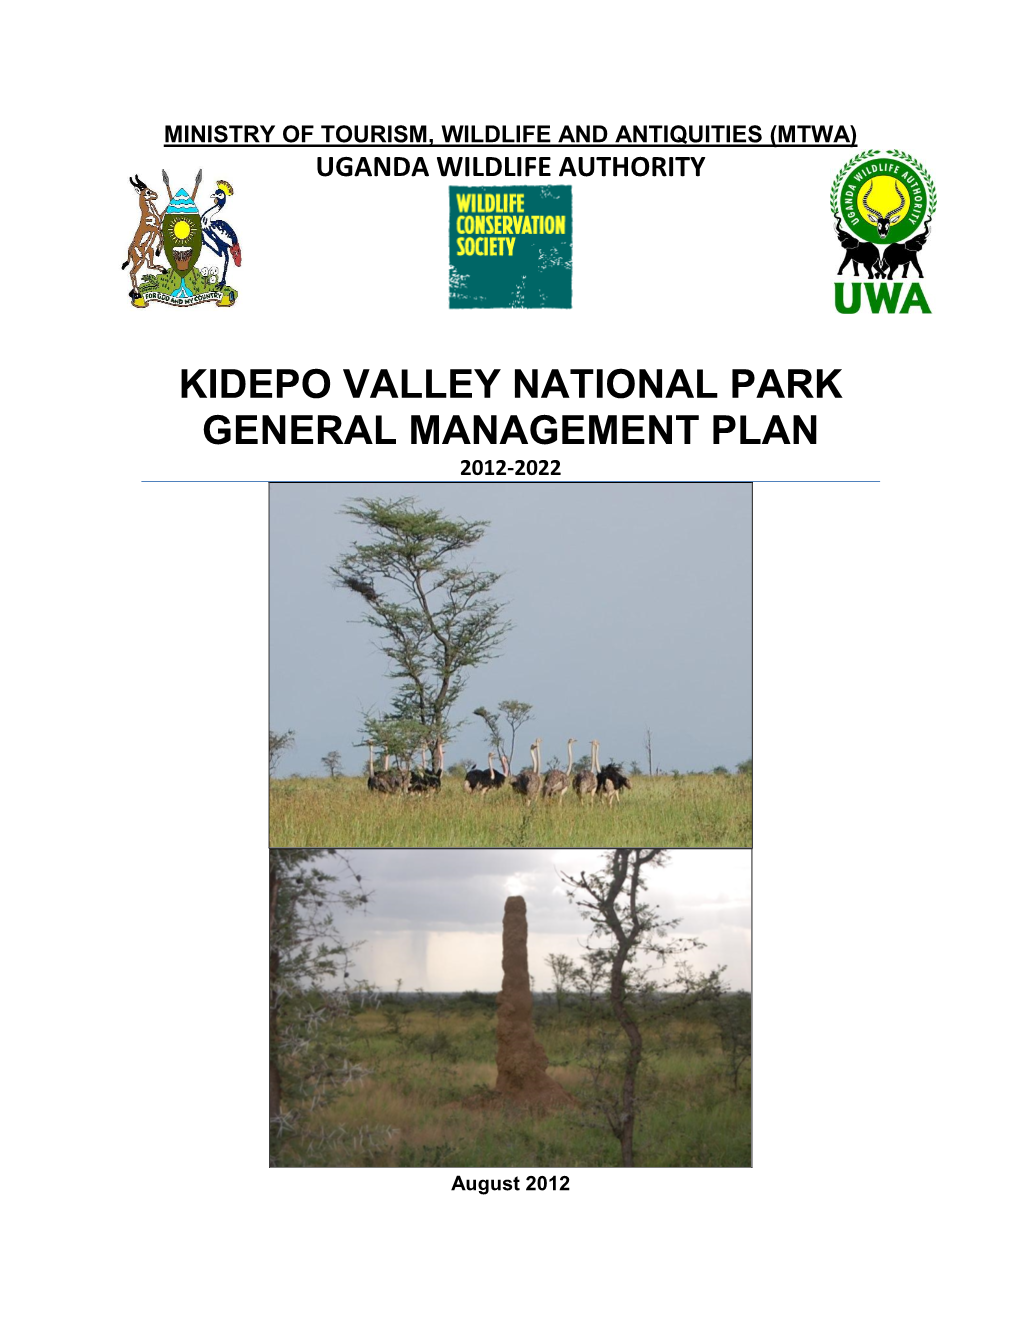 Kidepo Valley National Park General Management Plan 2012-2022